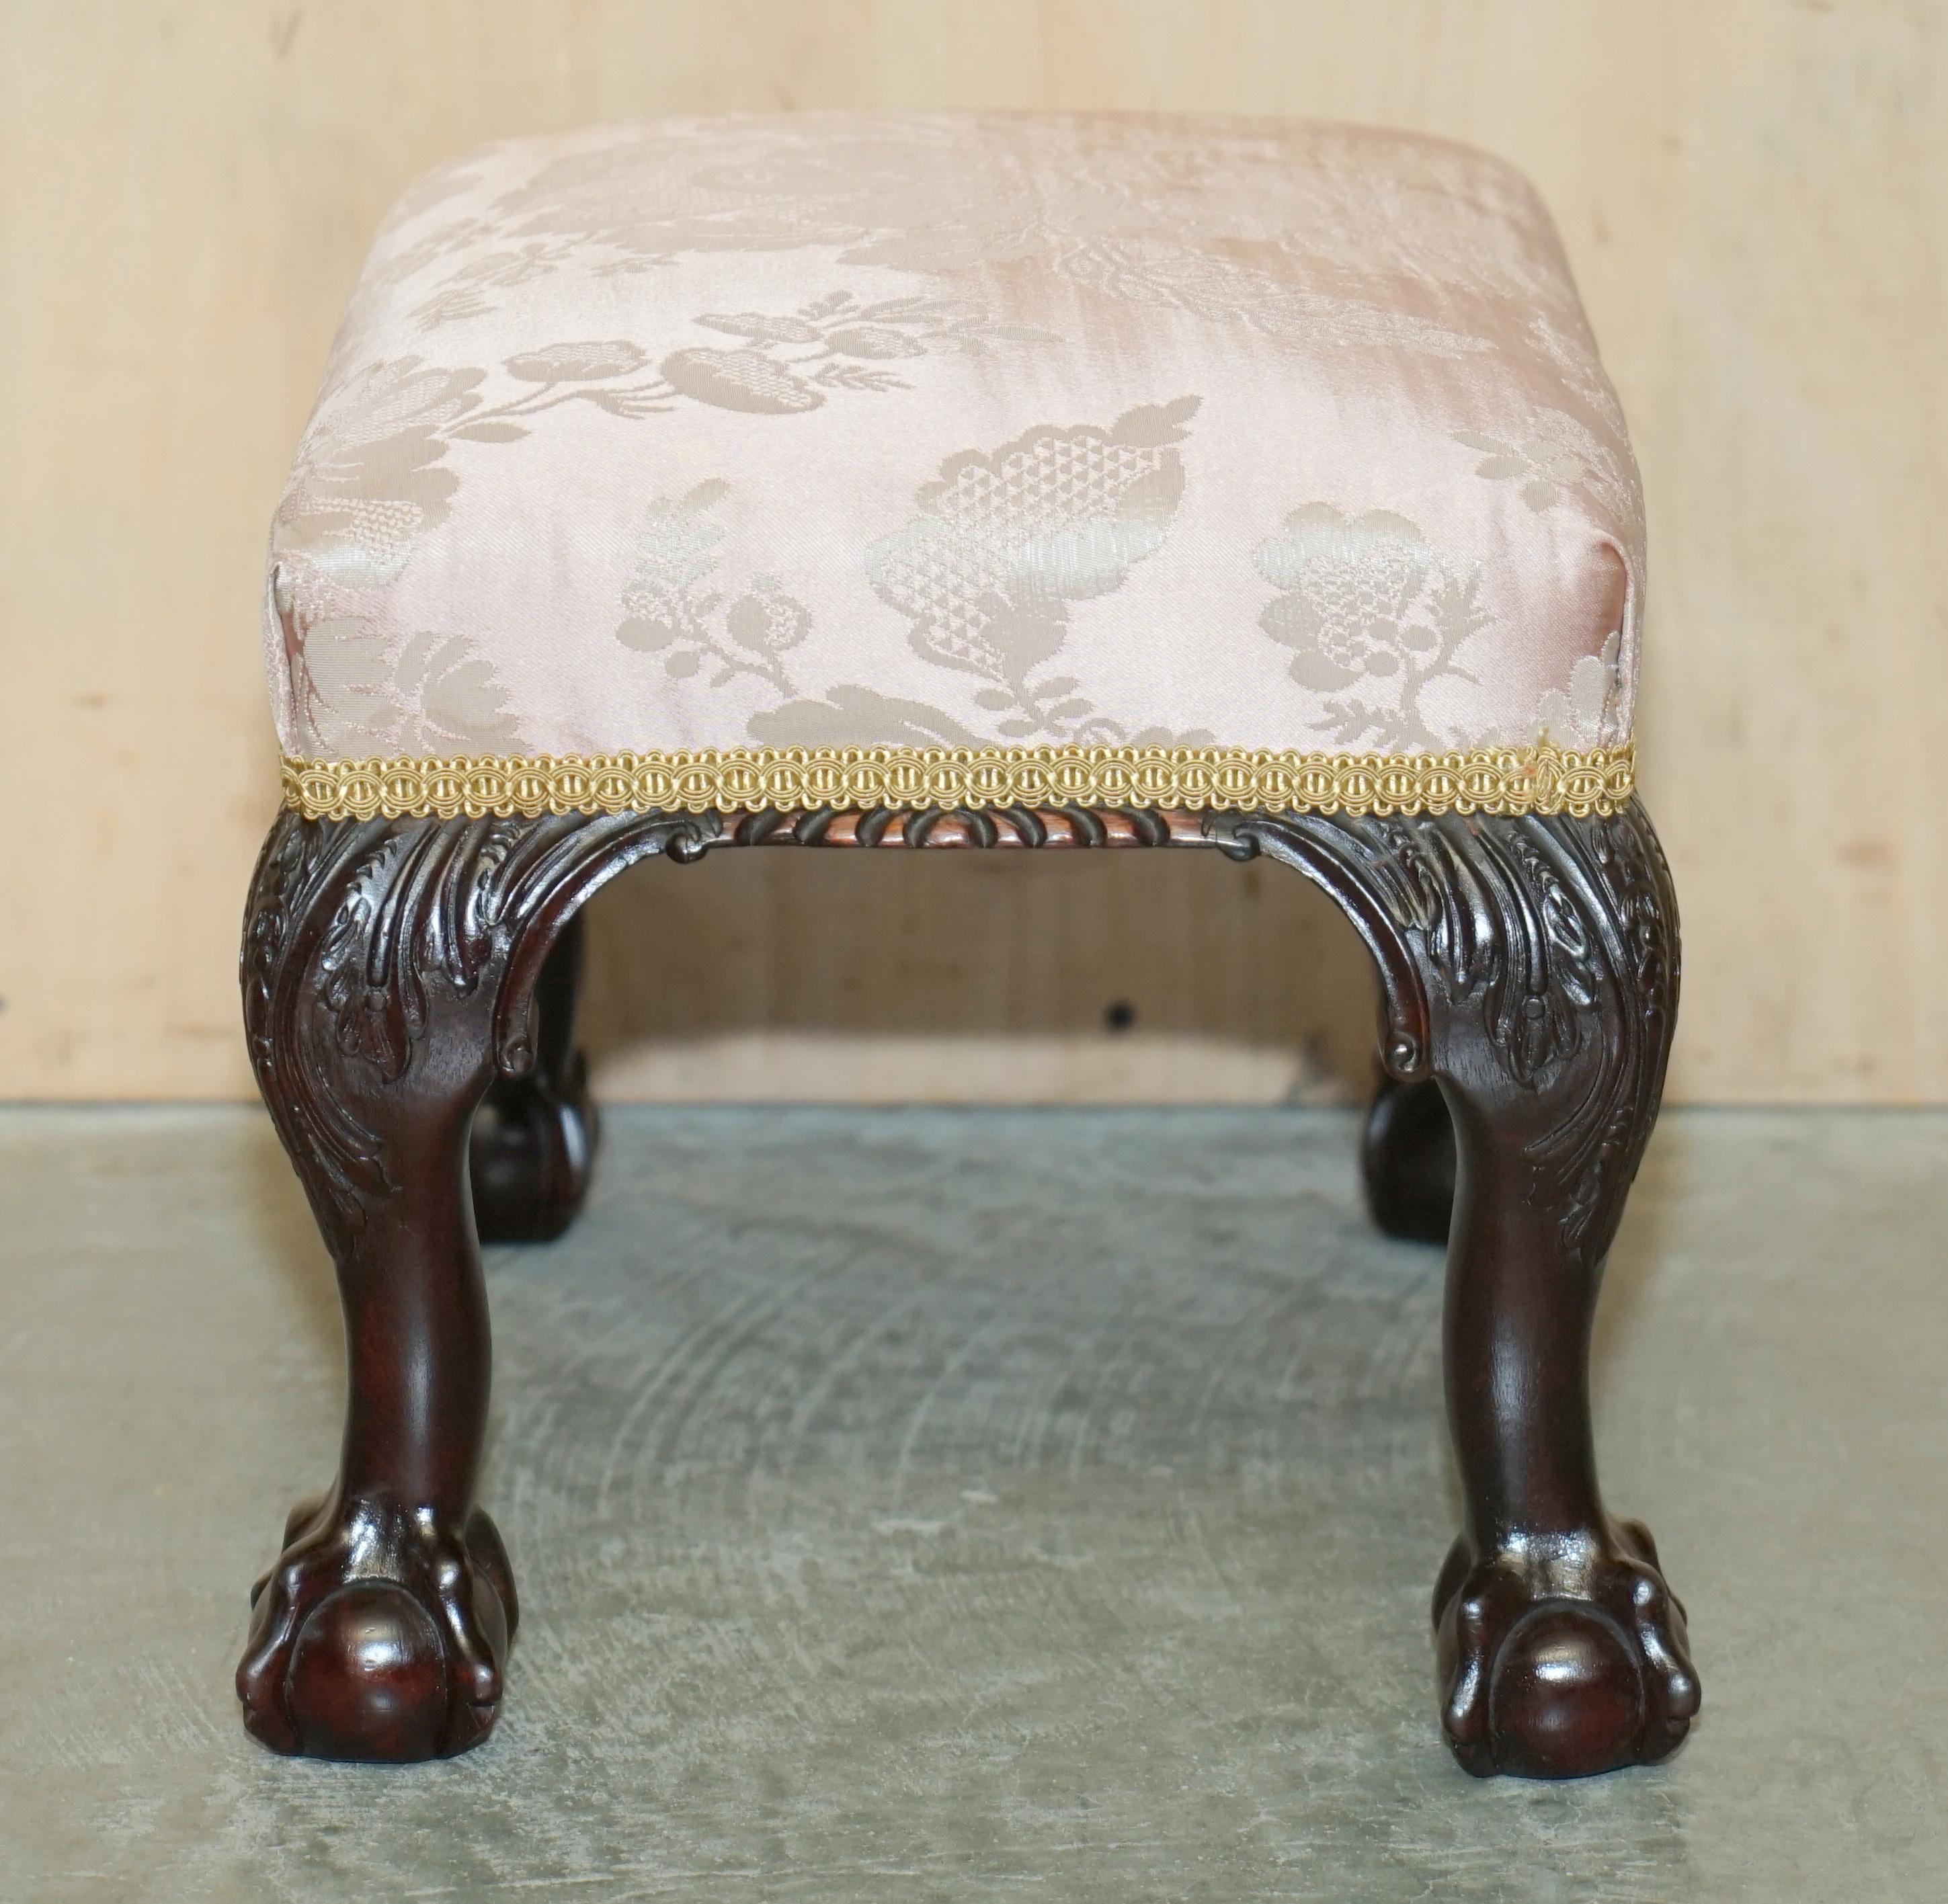 SUBLIME PAiR OF ANTIQUE VICTORIAN CLAW & BALL HARDWOOD FRAMED SMALL FOOTSTOOLS For Sale 9